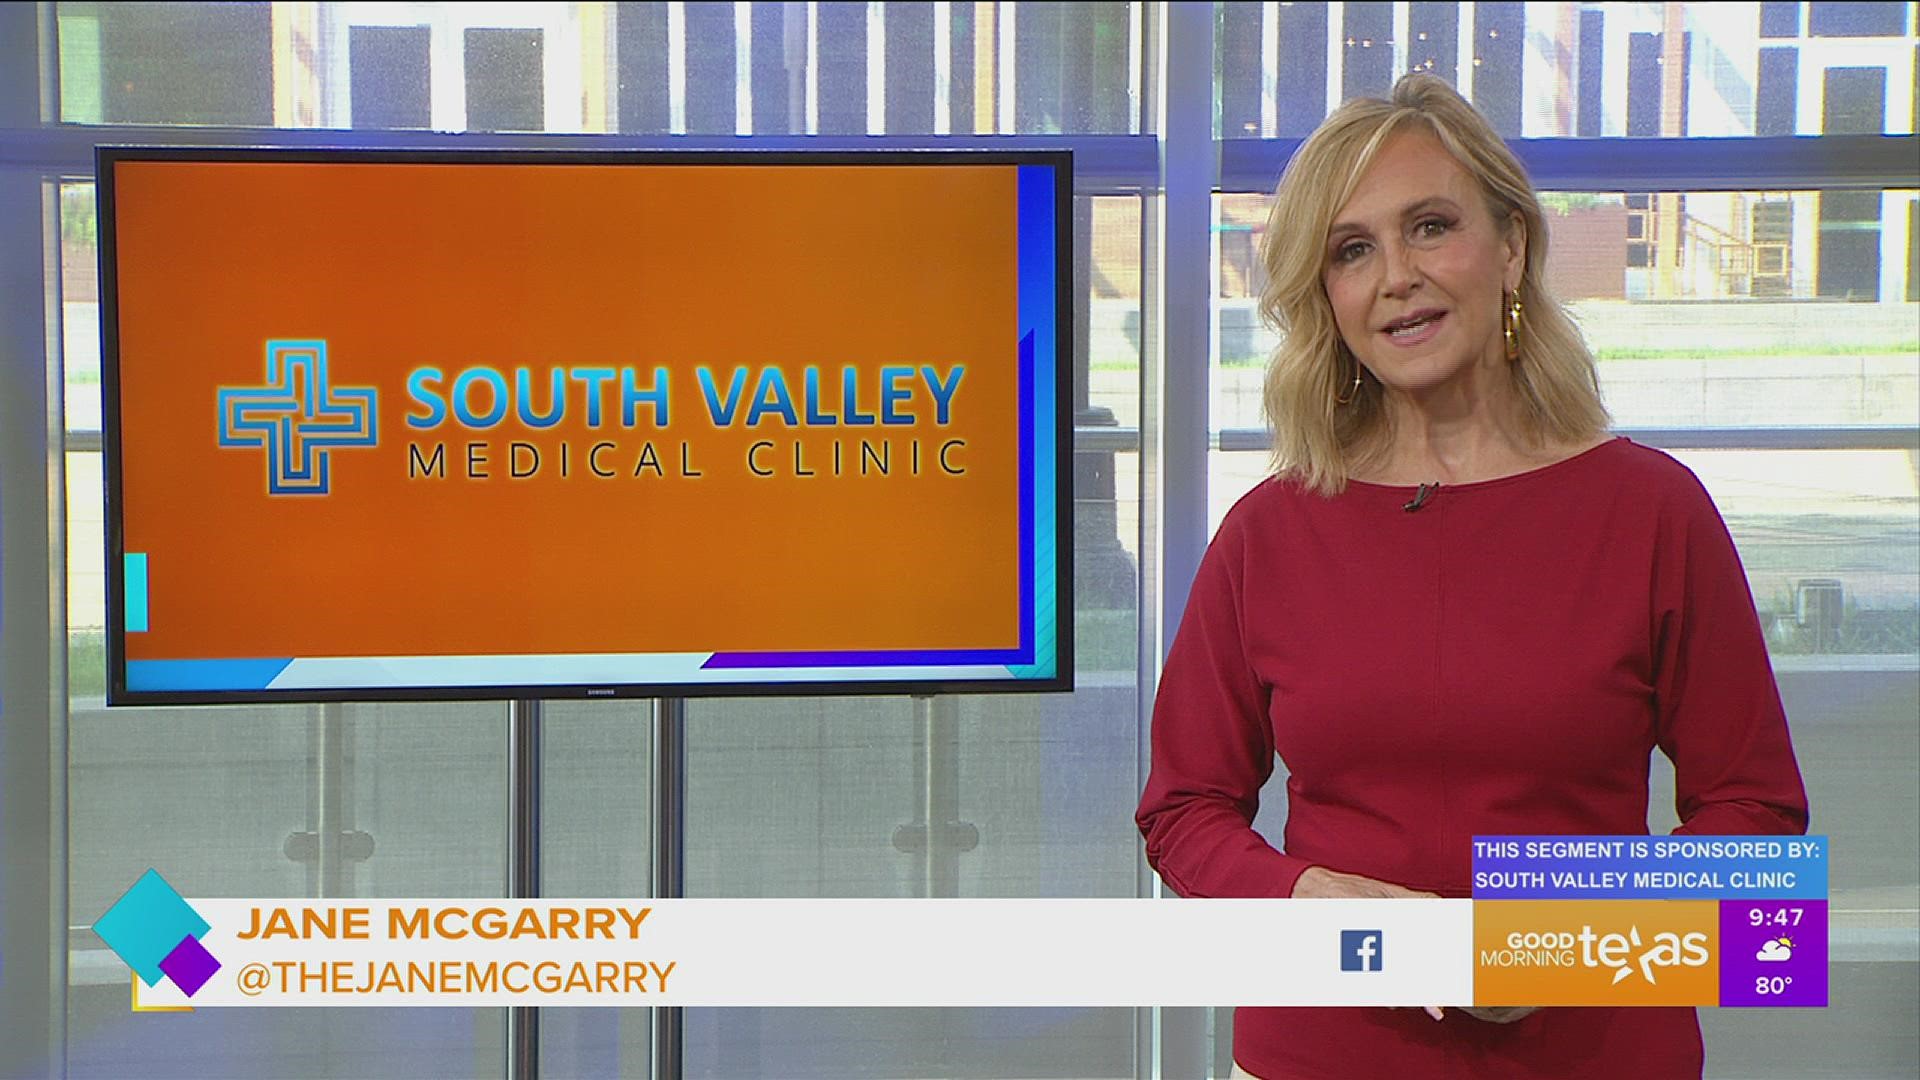 This segment is sponsored by: South Valley Medical Clinic. Call them at 214.937.5000 or visit them at southvalleymedicalclinic.com